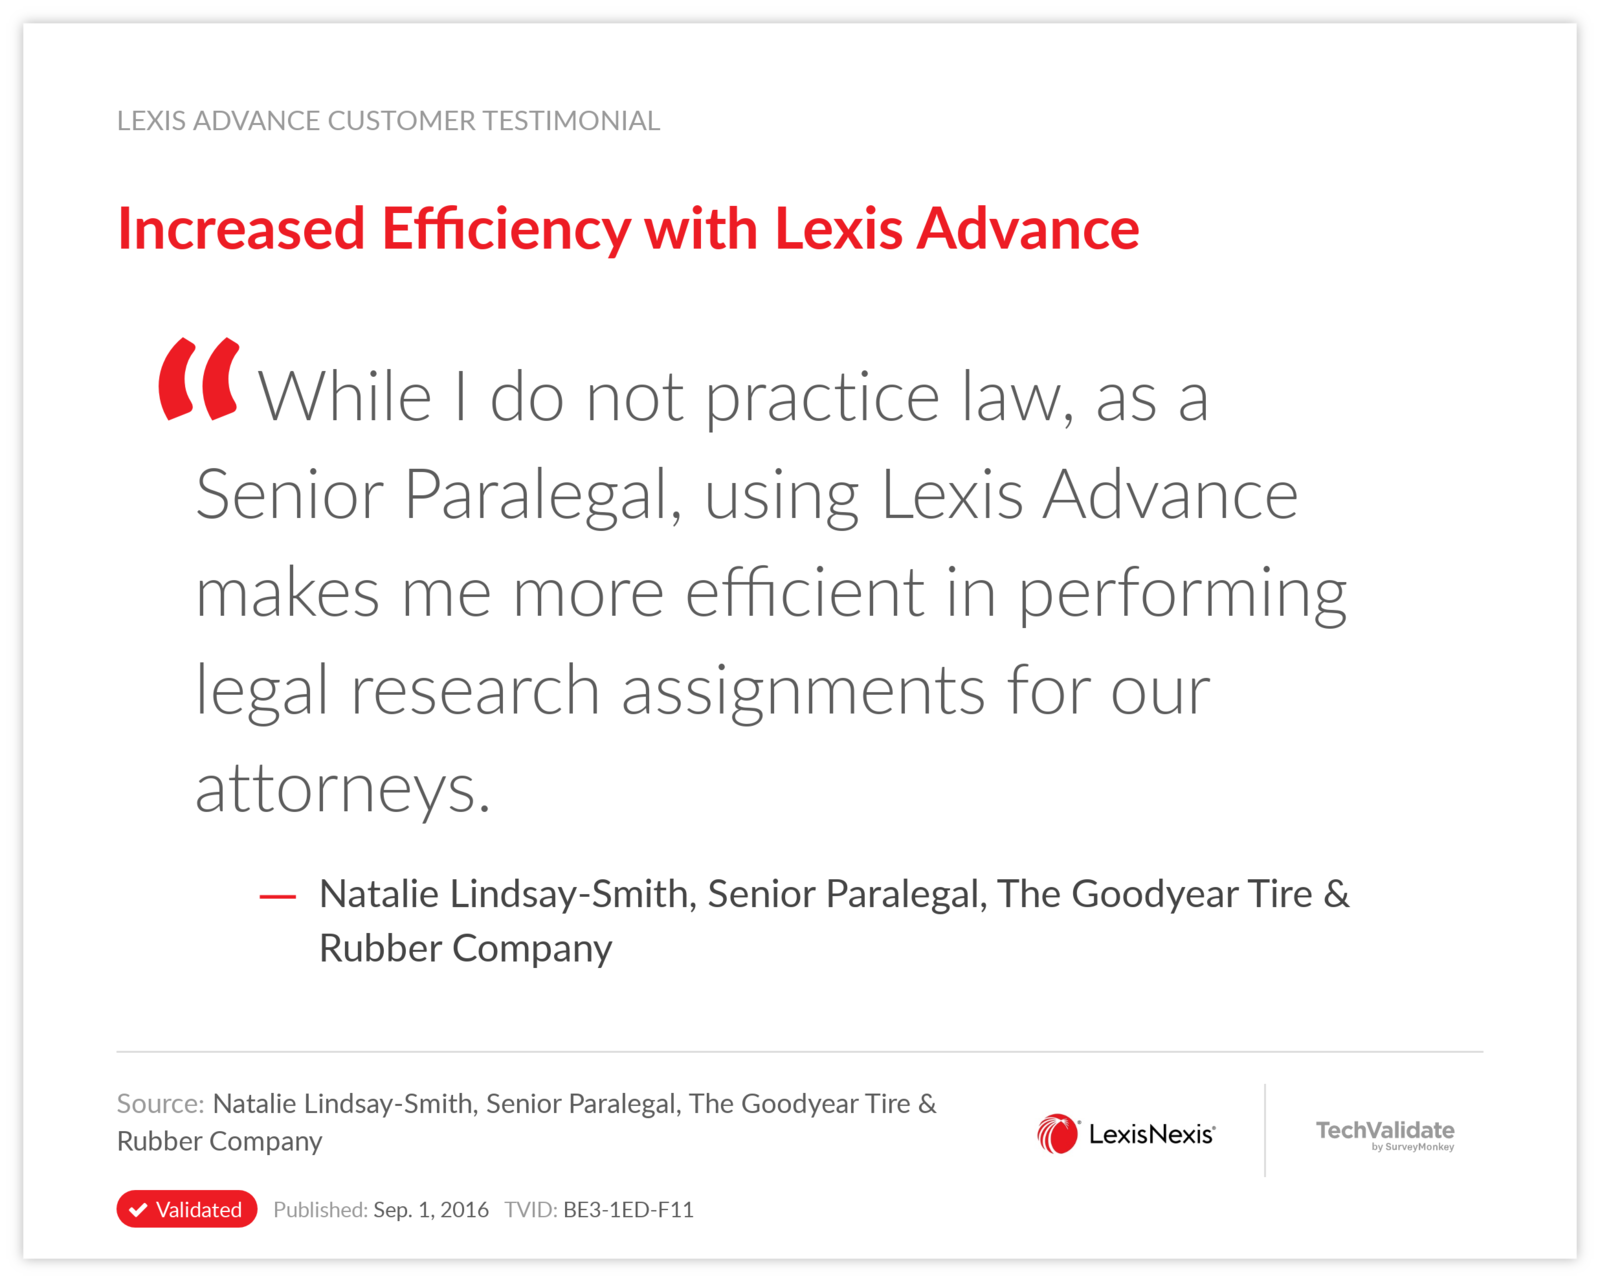 Increased Efficiency with Lexis Advance